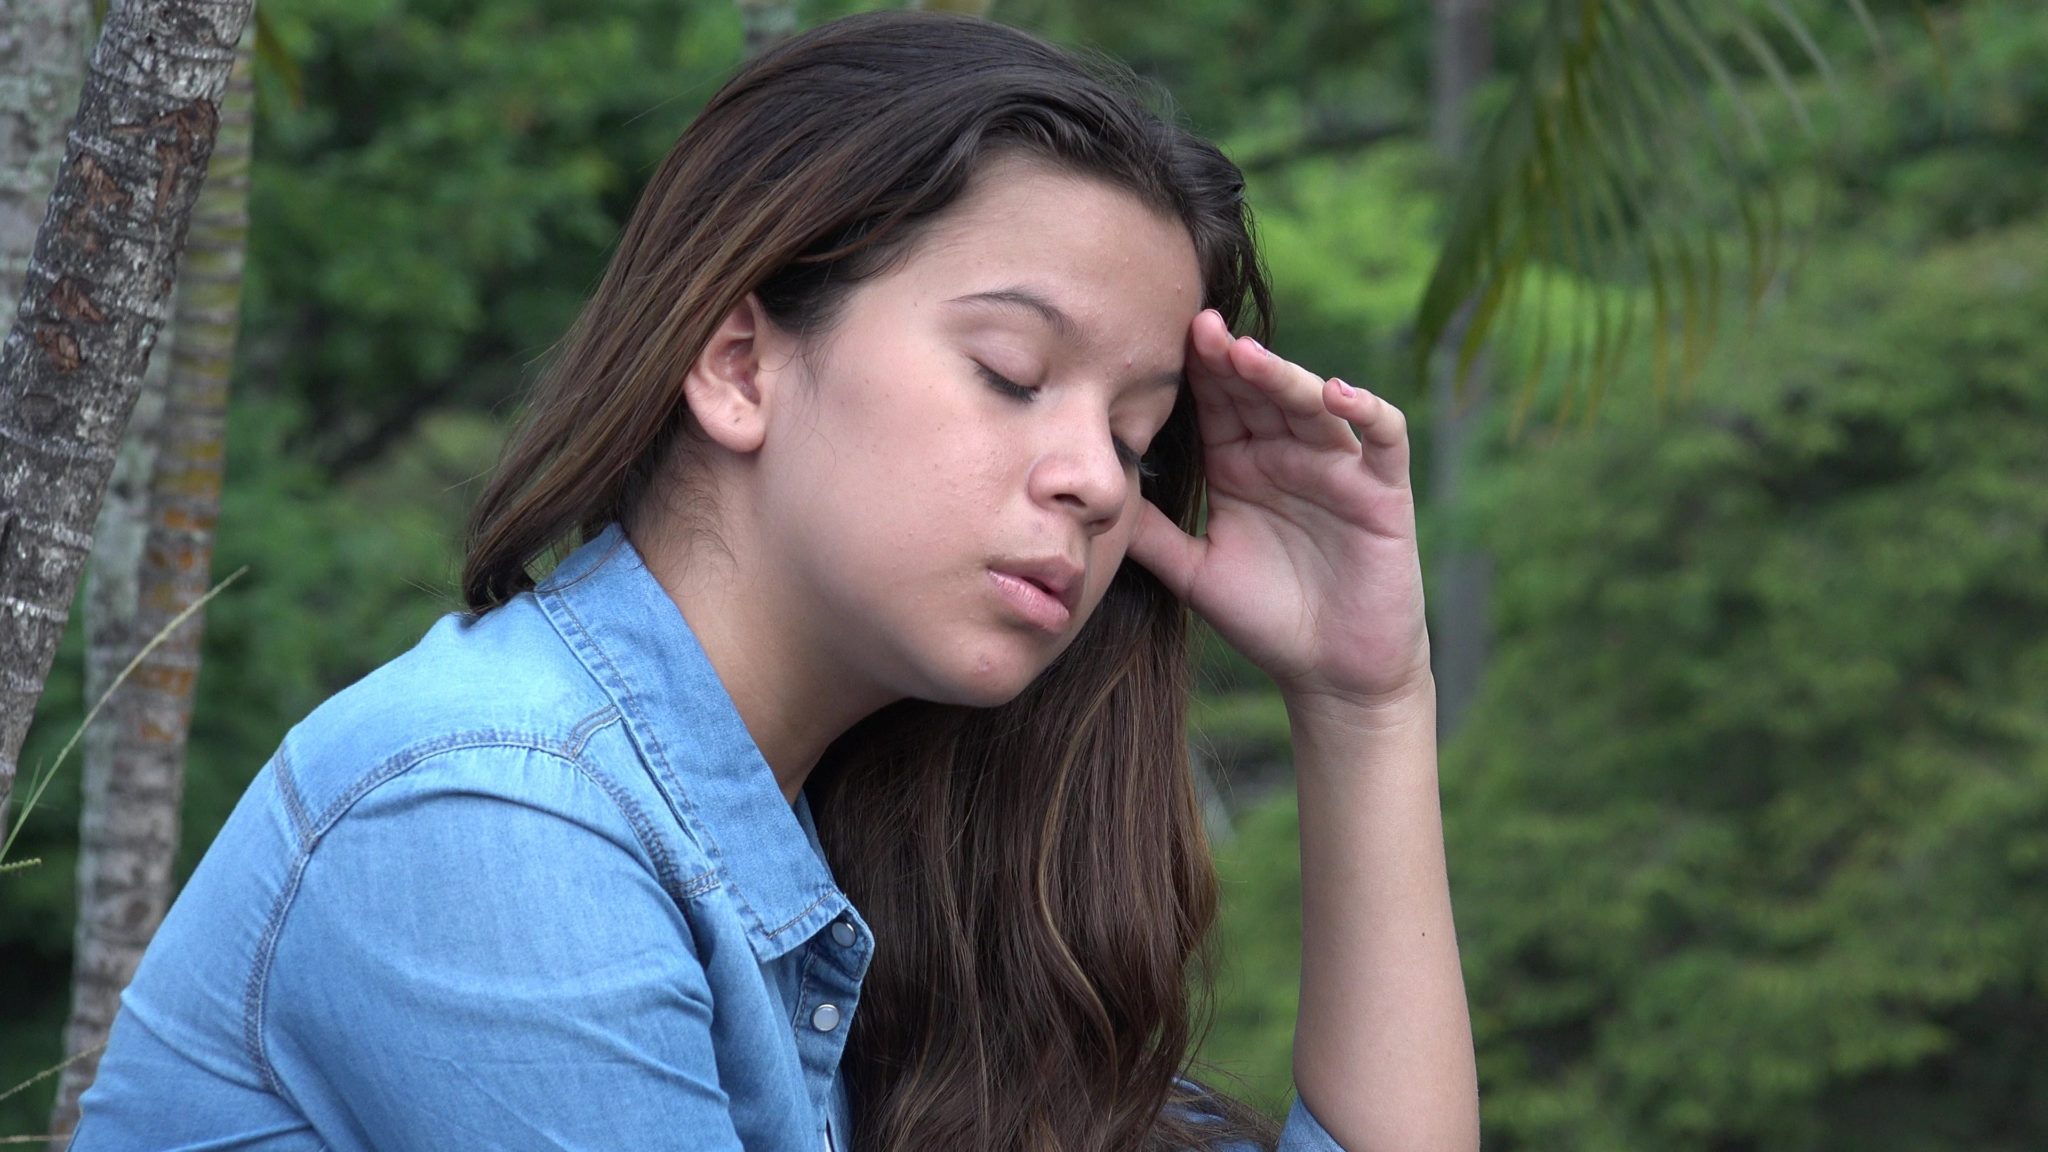 Distraught teen girl, with eyes closed and hand to head